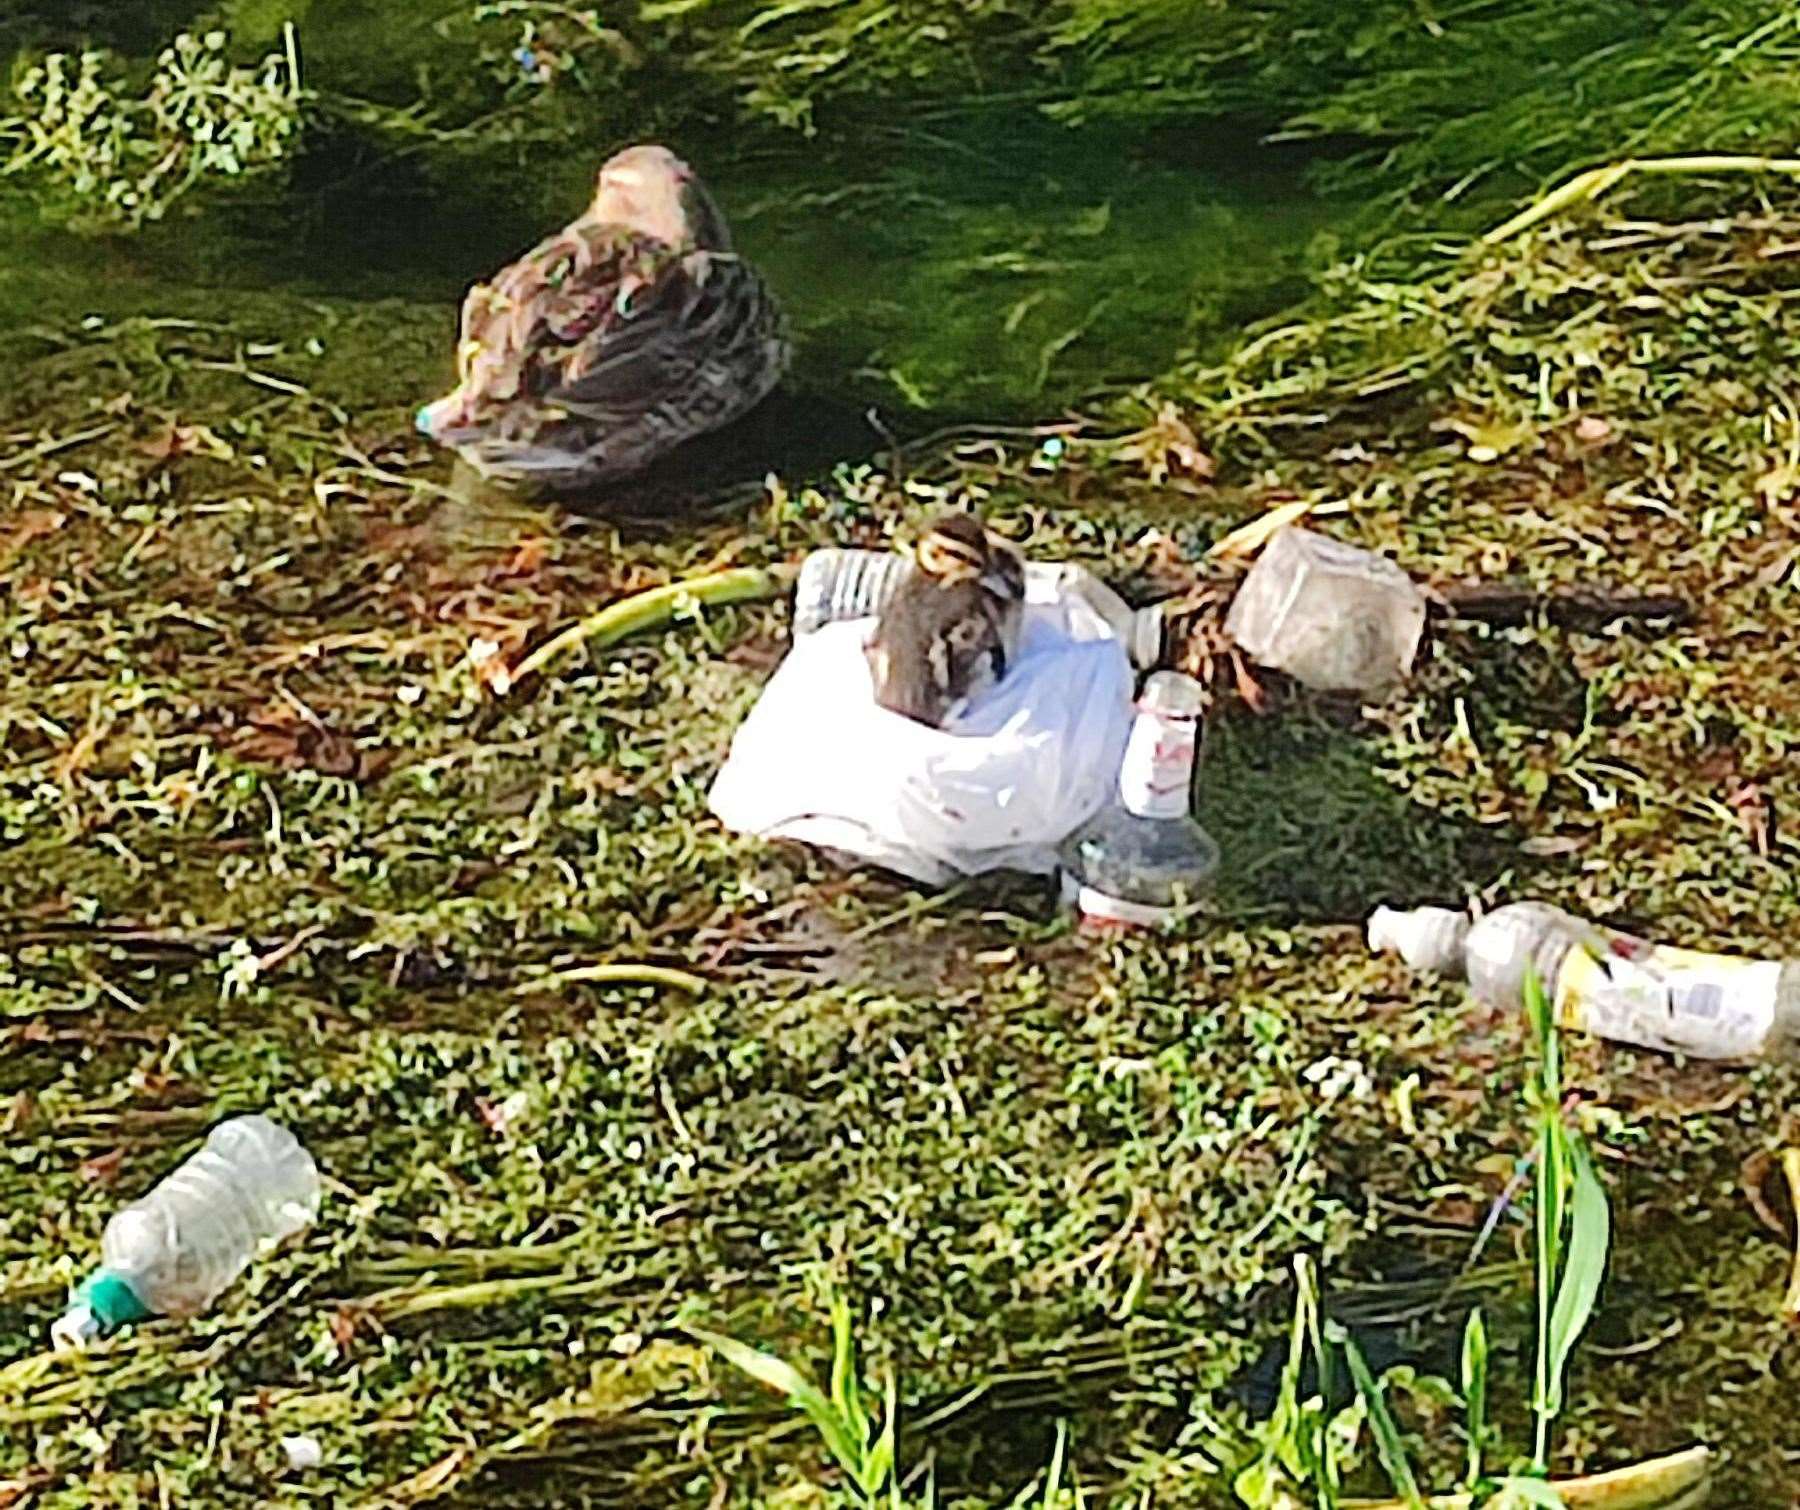 The duckling was spotted near Millers Field in Canterbury on Monday. Picture: @travellingfortales